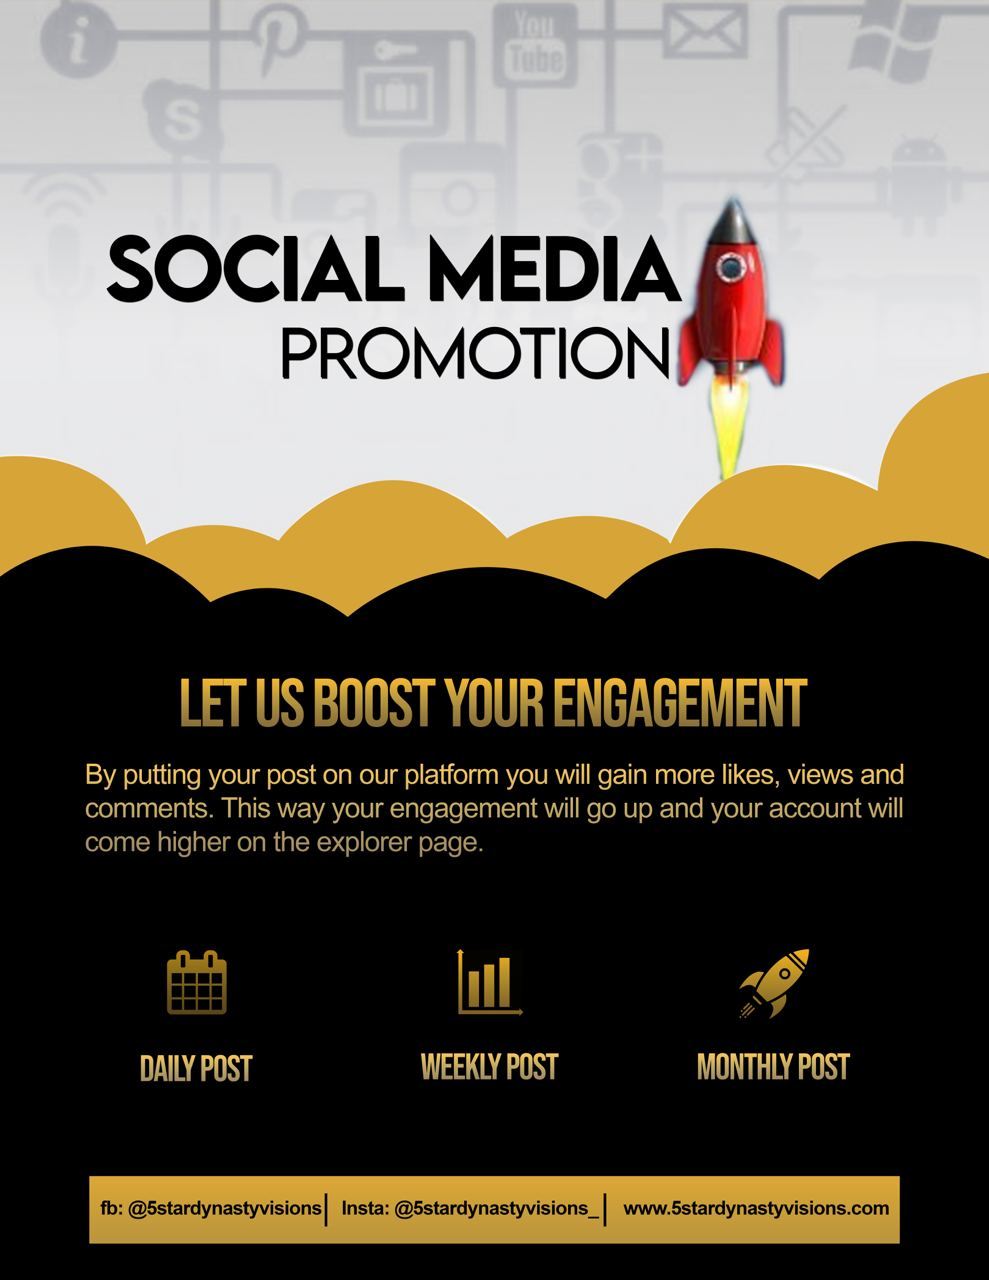 5 Star Dynasty Visions will help you with your social media promotions for all platforms, aiming to bring your platform to the explorer page and generate more organic traffic.